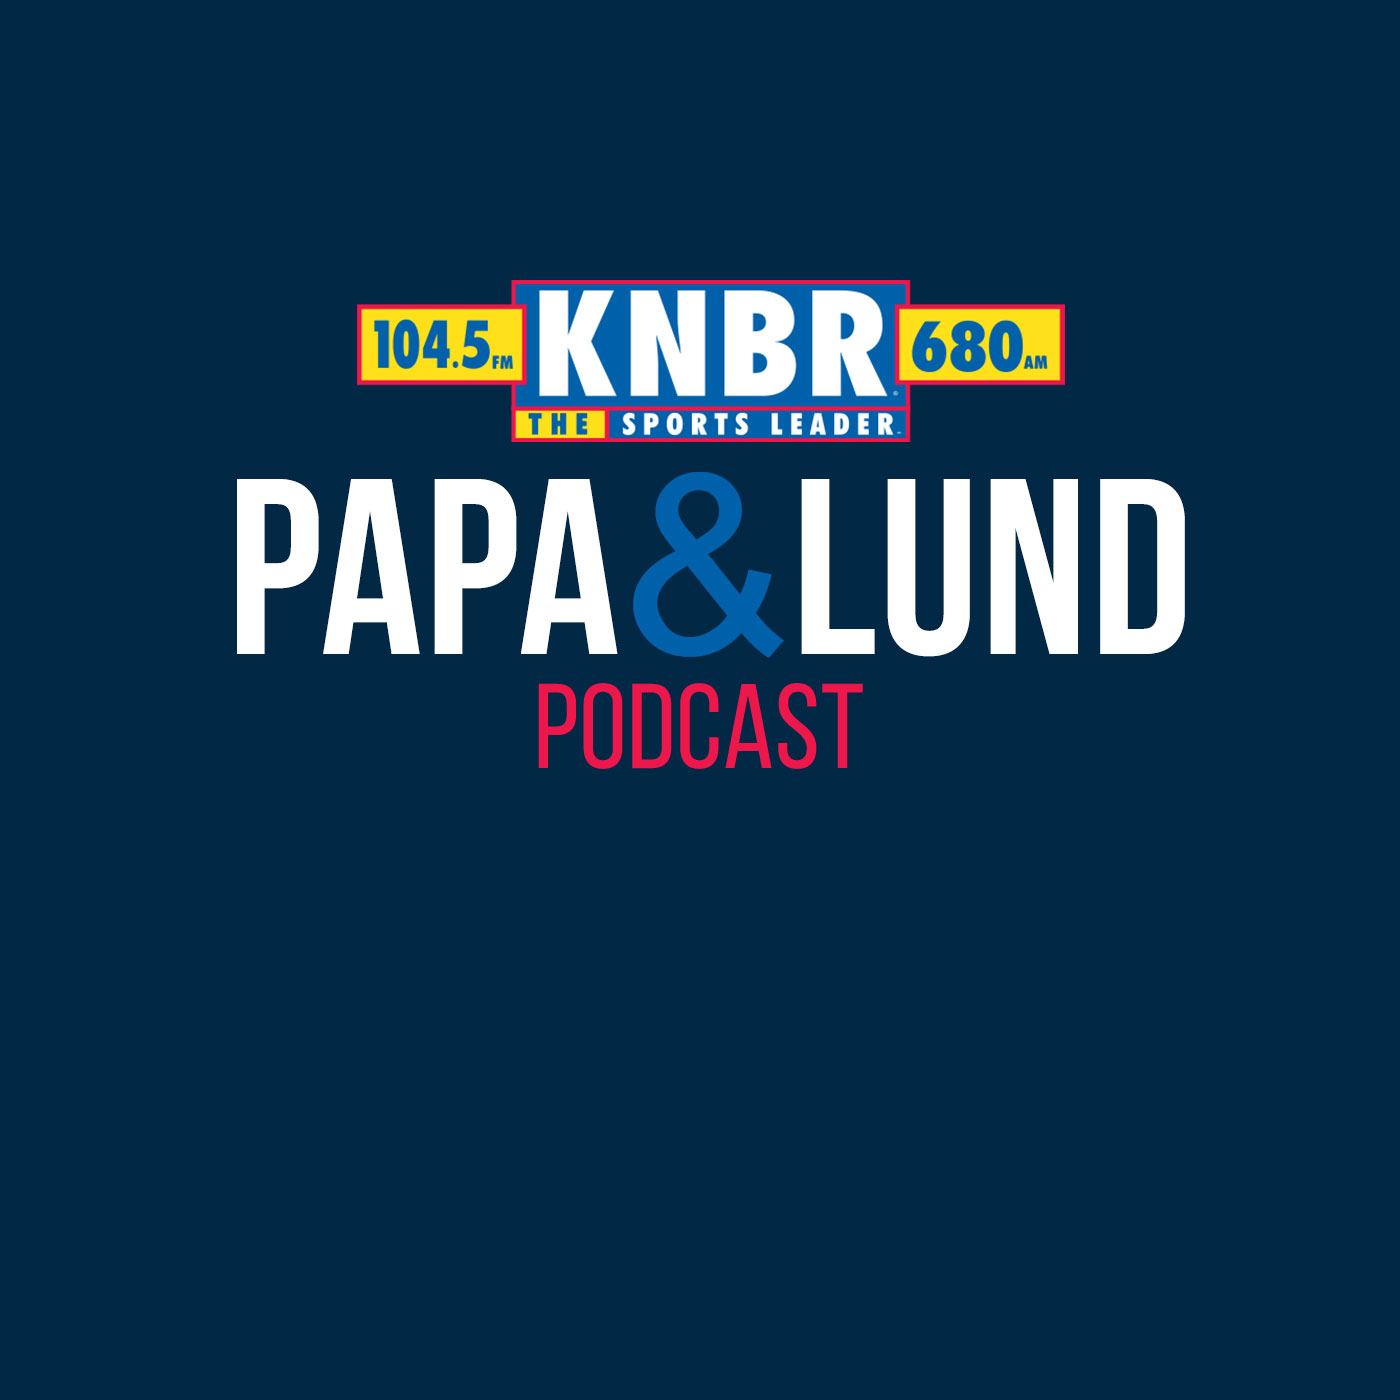 4-18 Brian Anderson of NBA on TNT joins Papa & Lund before calling Warriors / Nuggets game 2 in the playoffs